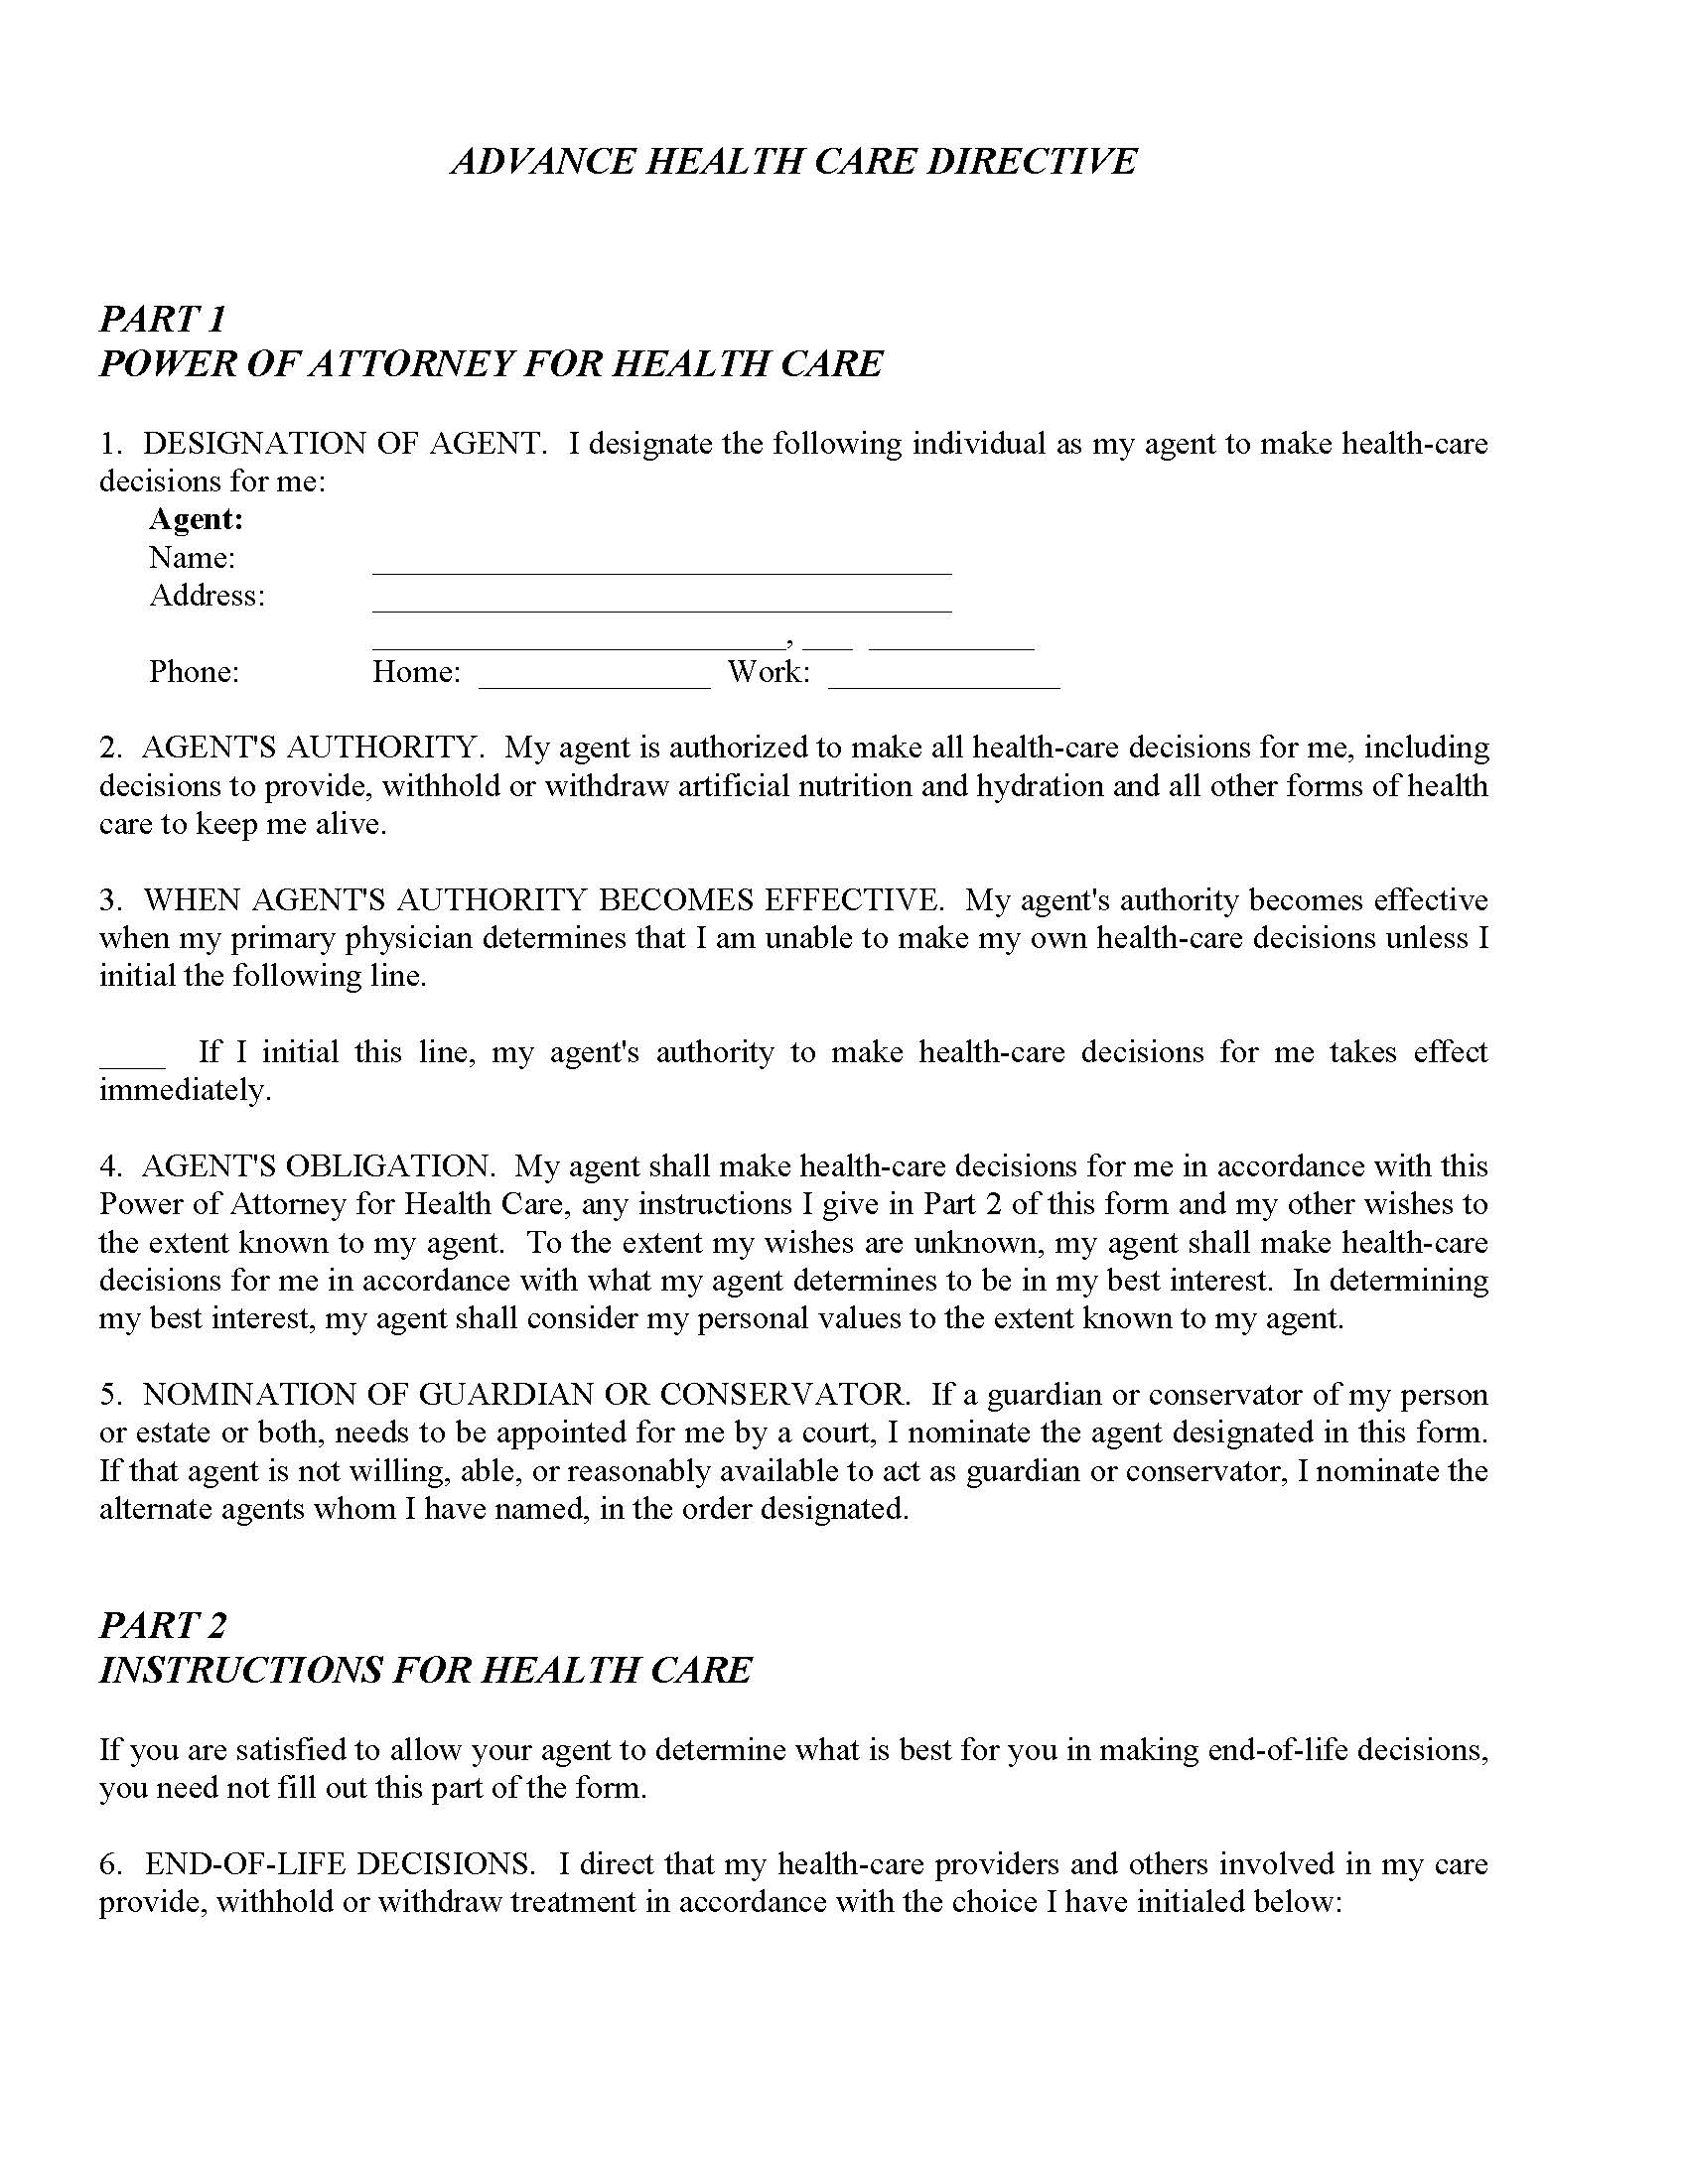 free-printable-power-of-attorney-forms-for-illinois-printable-forms-free-online